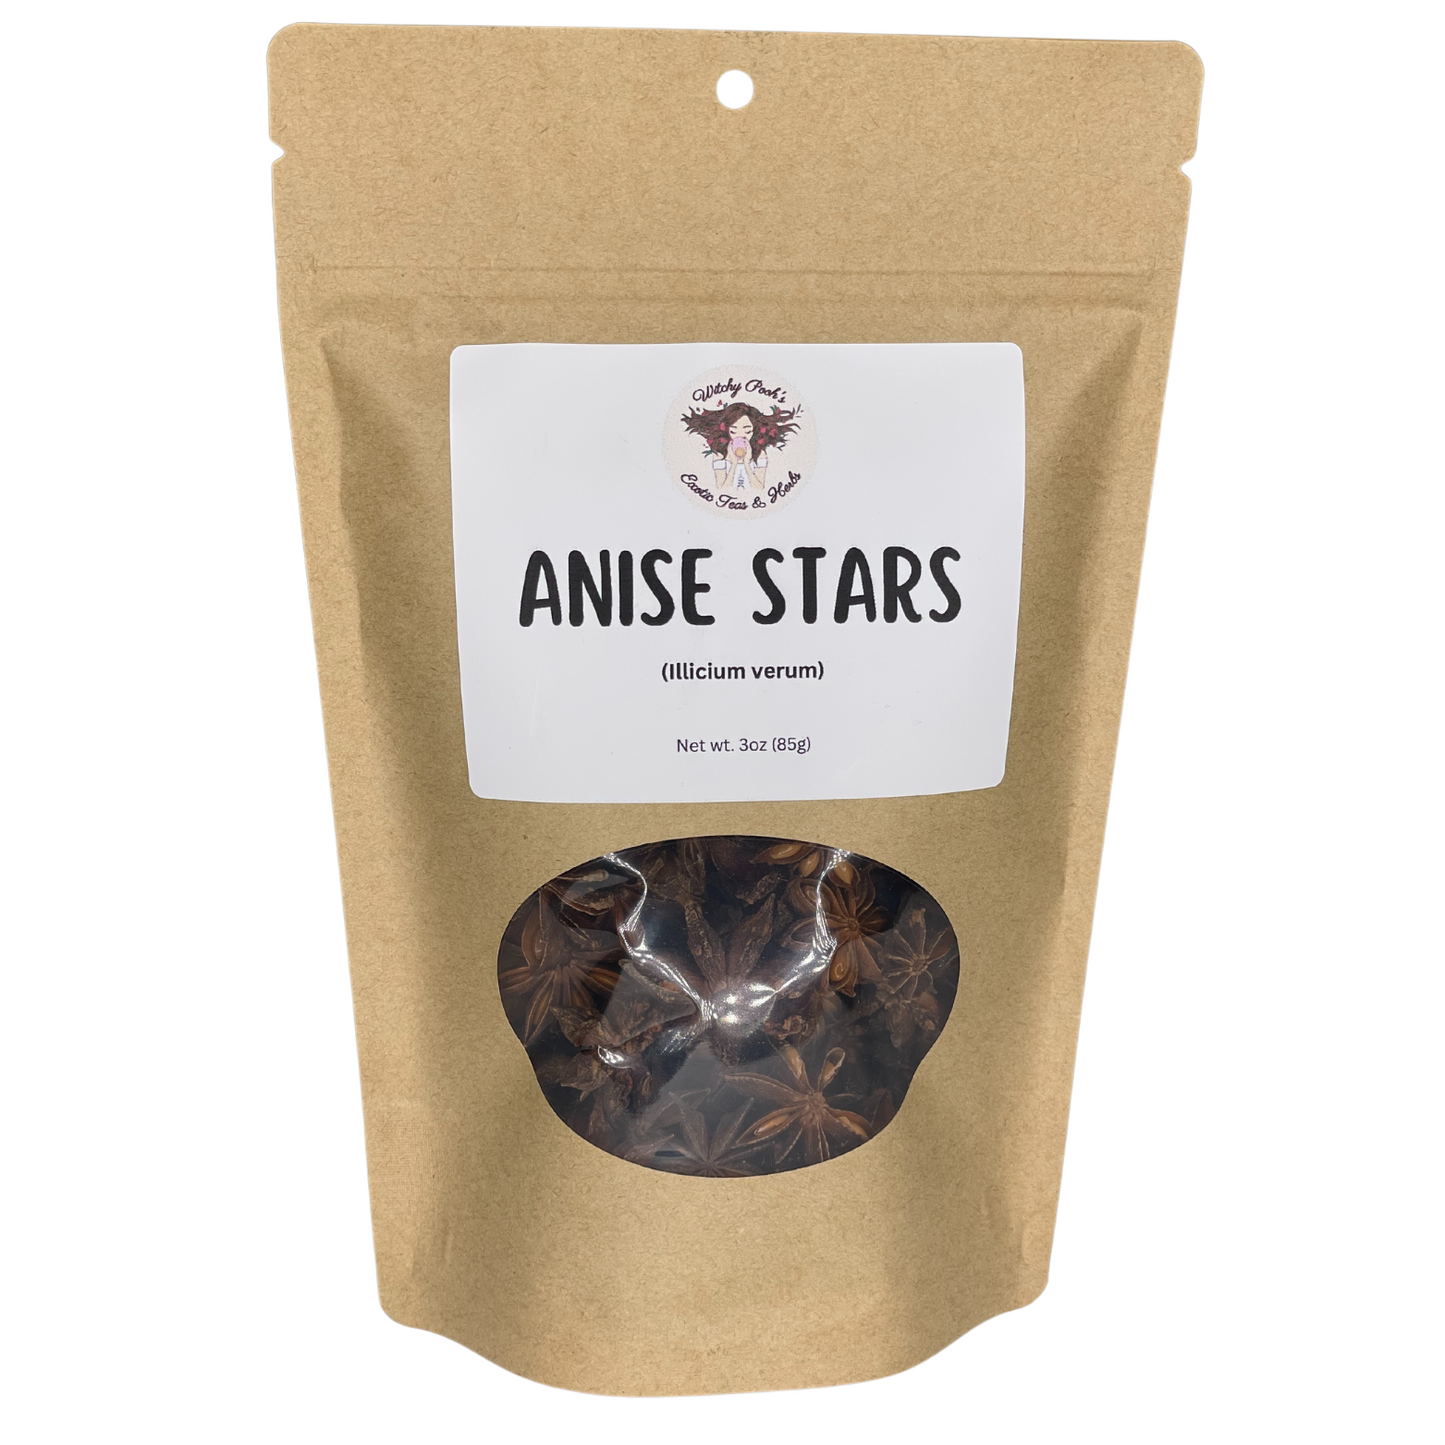 Witchy Pooh's Anise Stars Whole High Quality Strong Smell for Simmer Pots, Cooking and Ritual-9